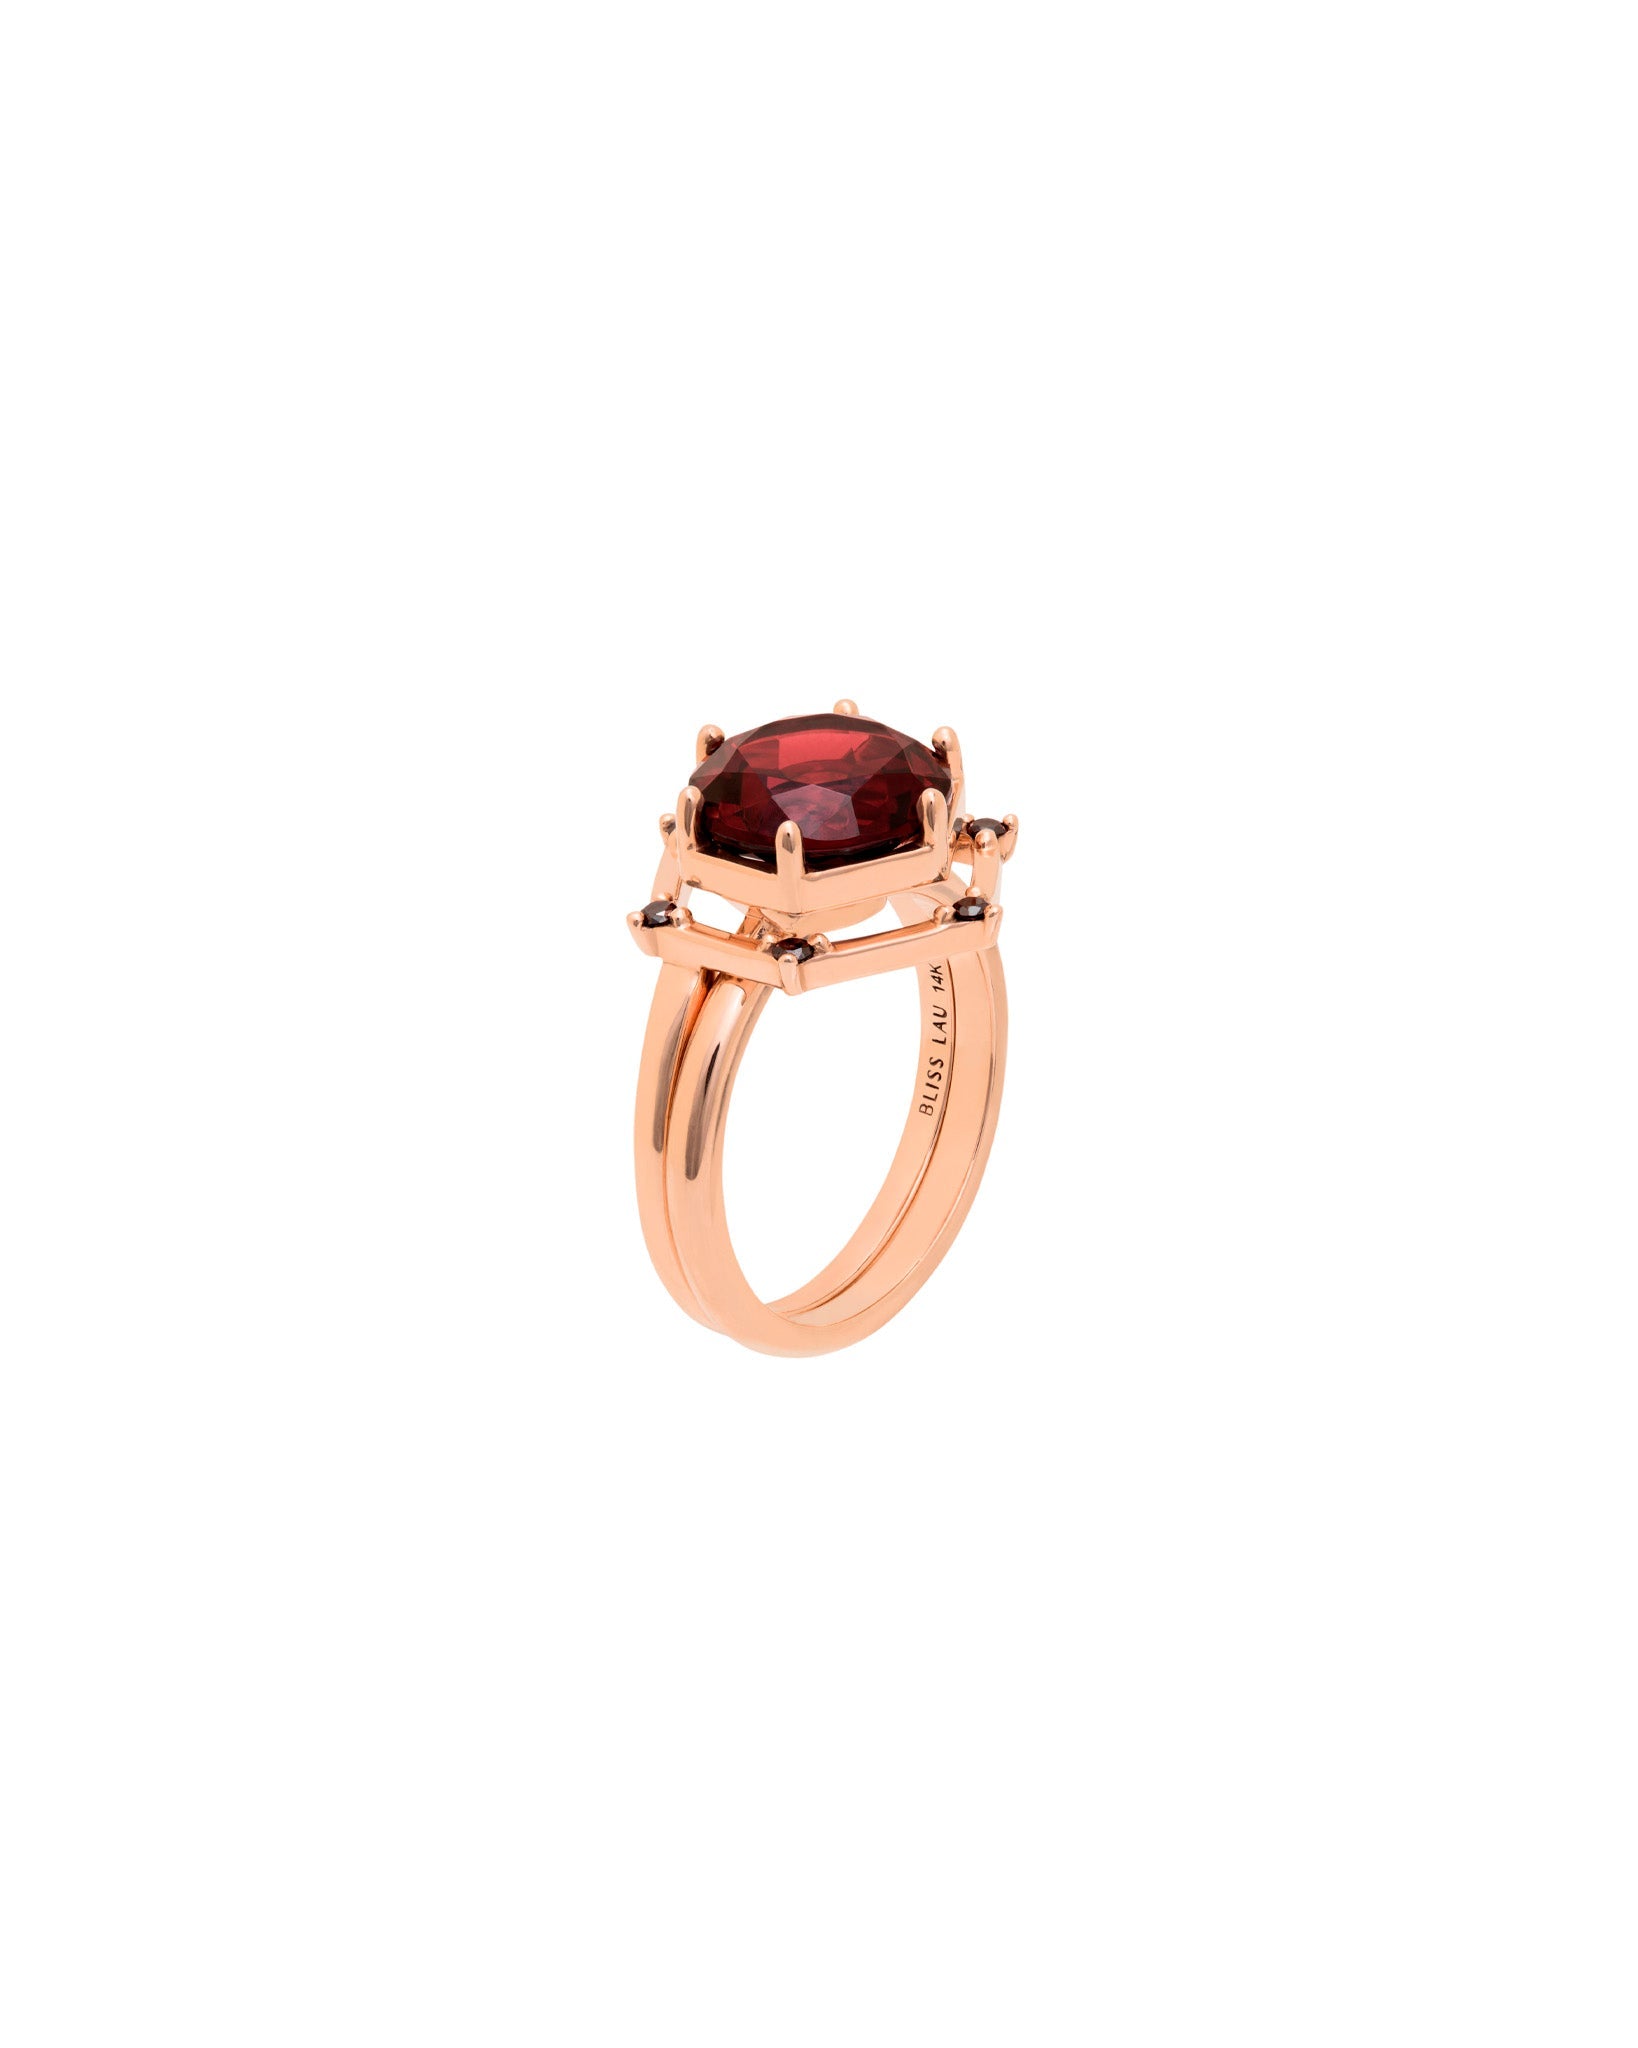 Bliss Lau interlocking ring with a red garnet center stone circled by black diamonds